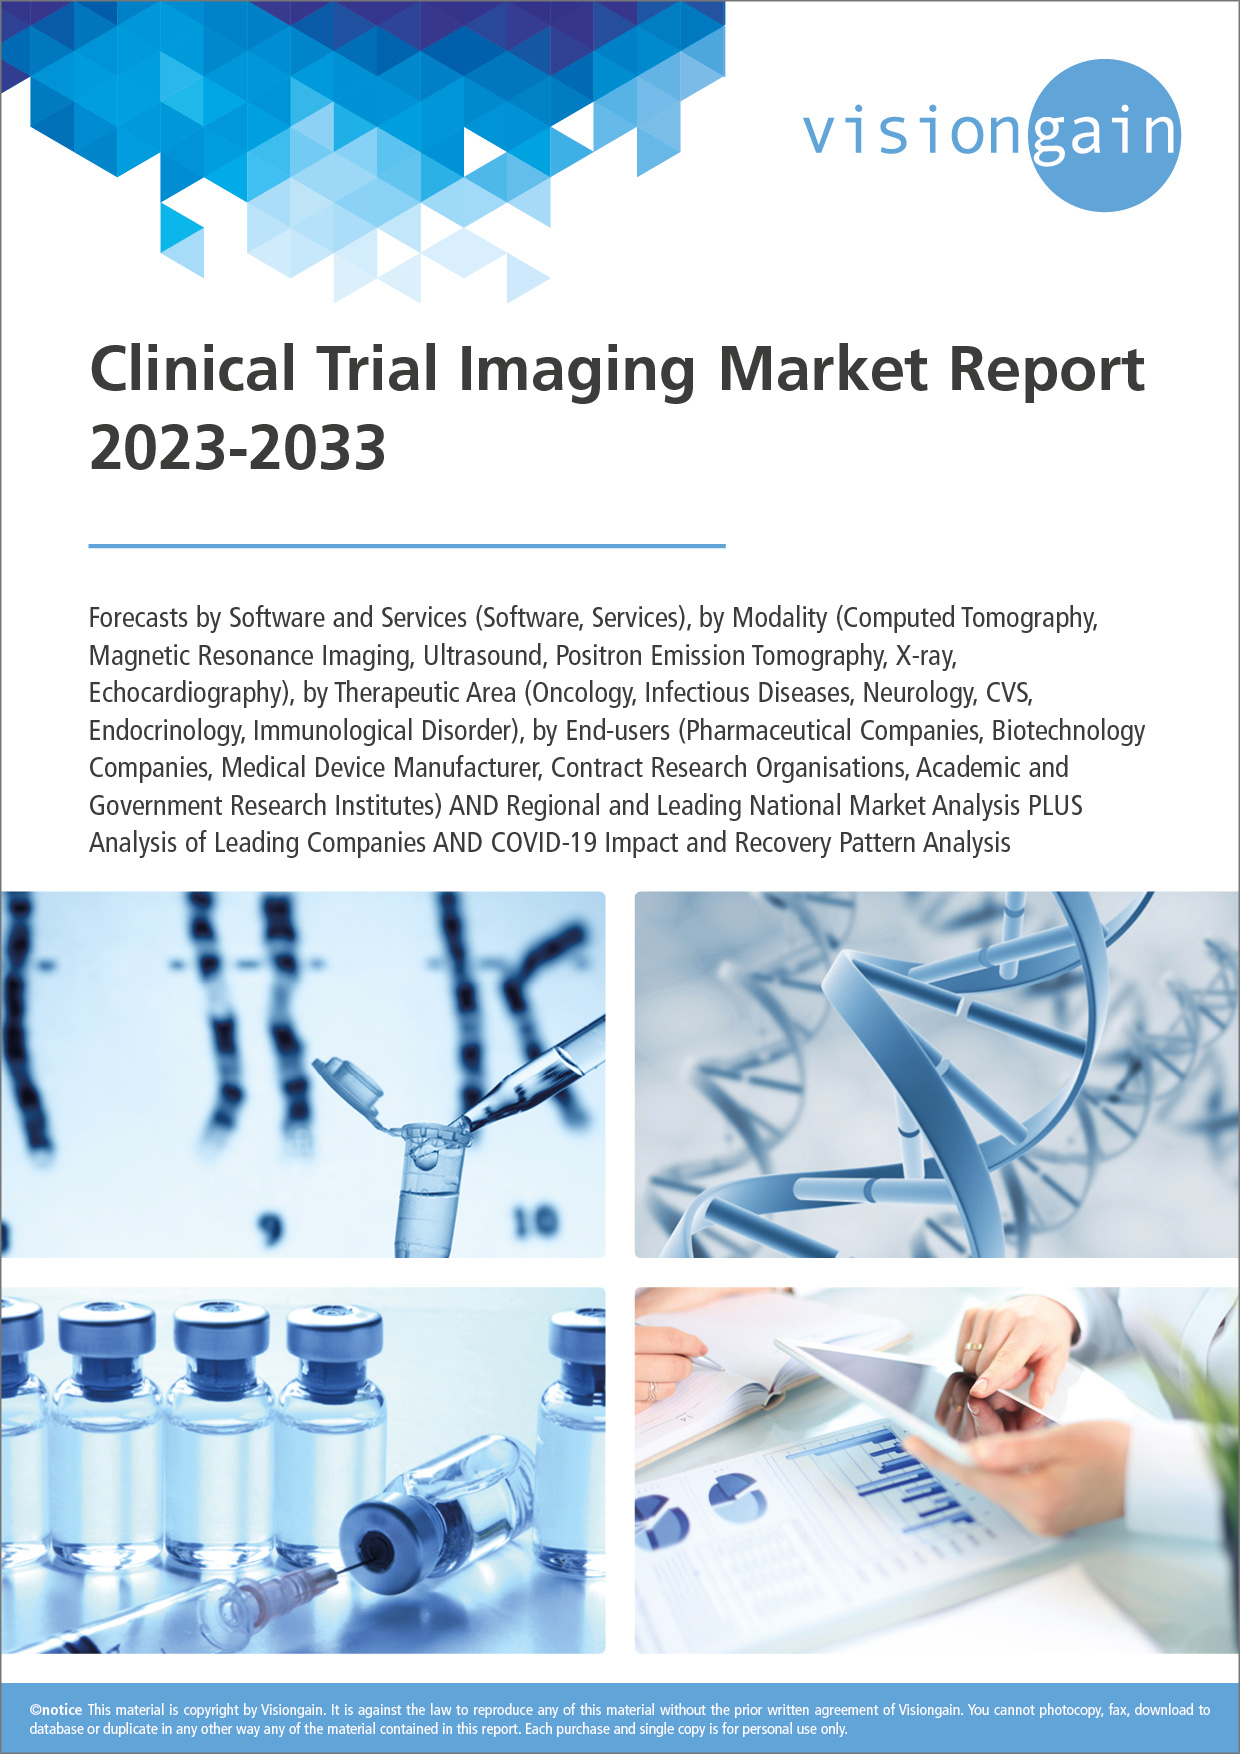 Clinical Trial Imaging Market Report 2023-2033